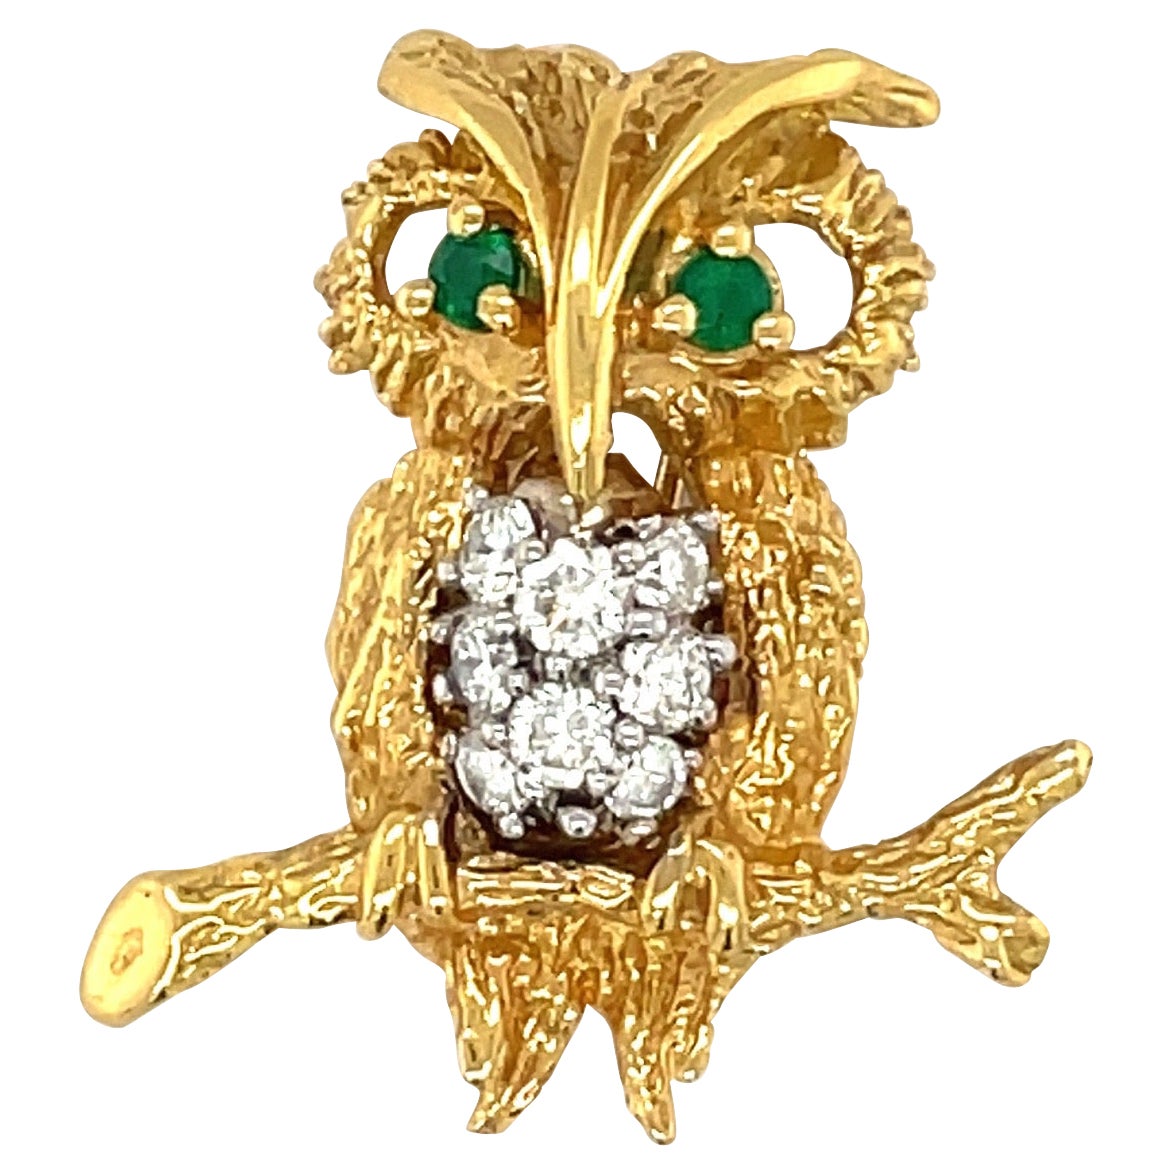 18Kt Yellow Gold Owl Brooch with Diamond 0.14Ct. & Emerald 0.14Ct.